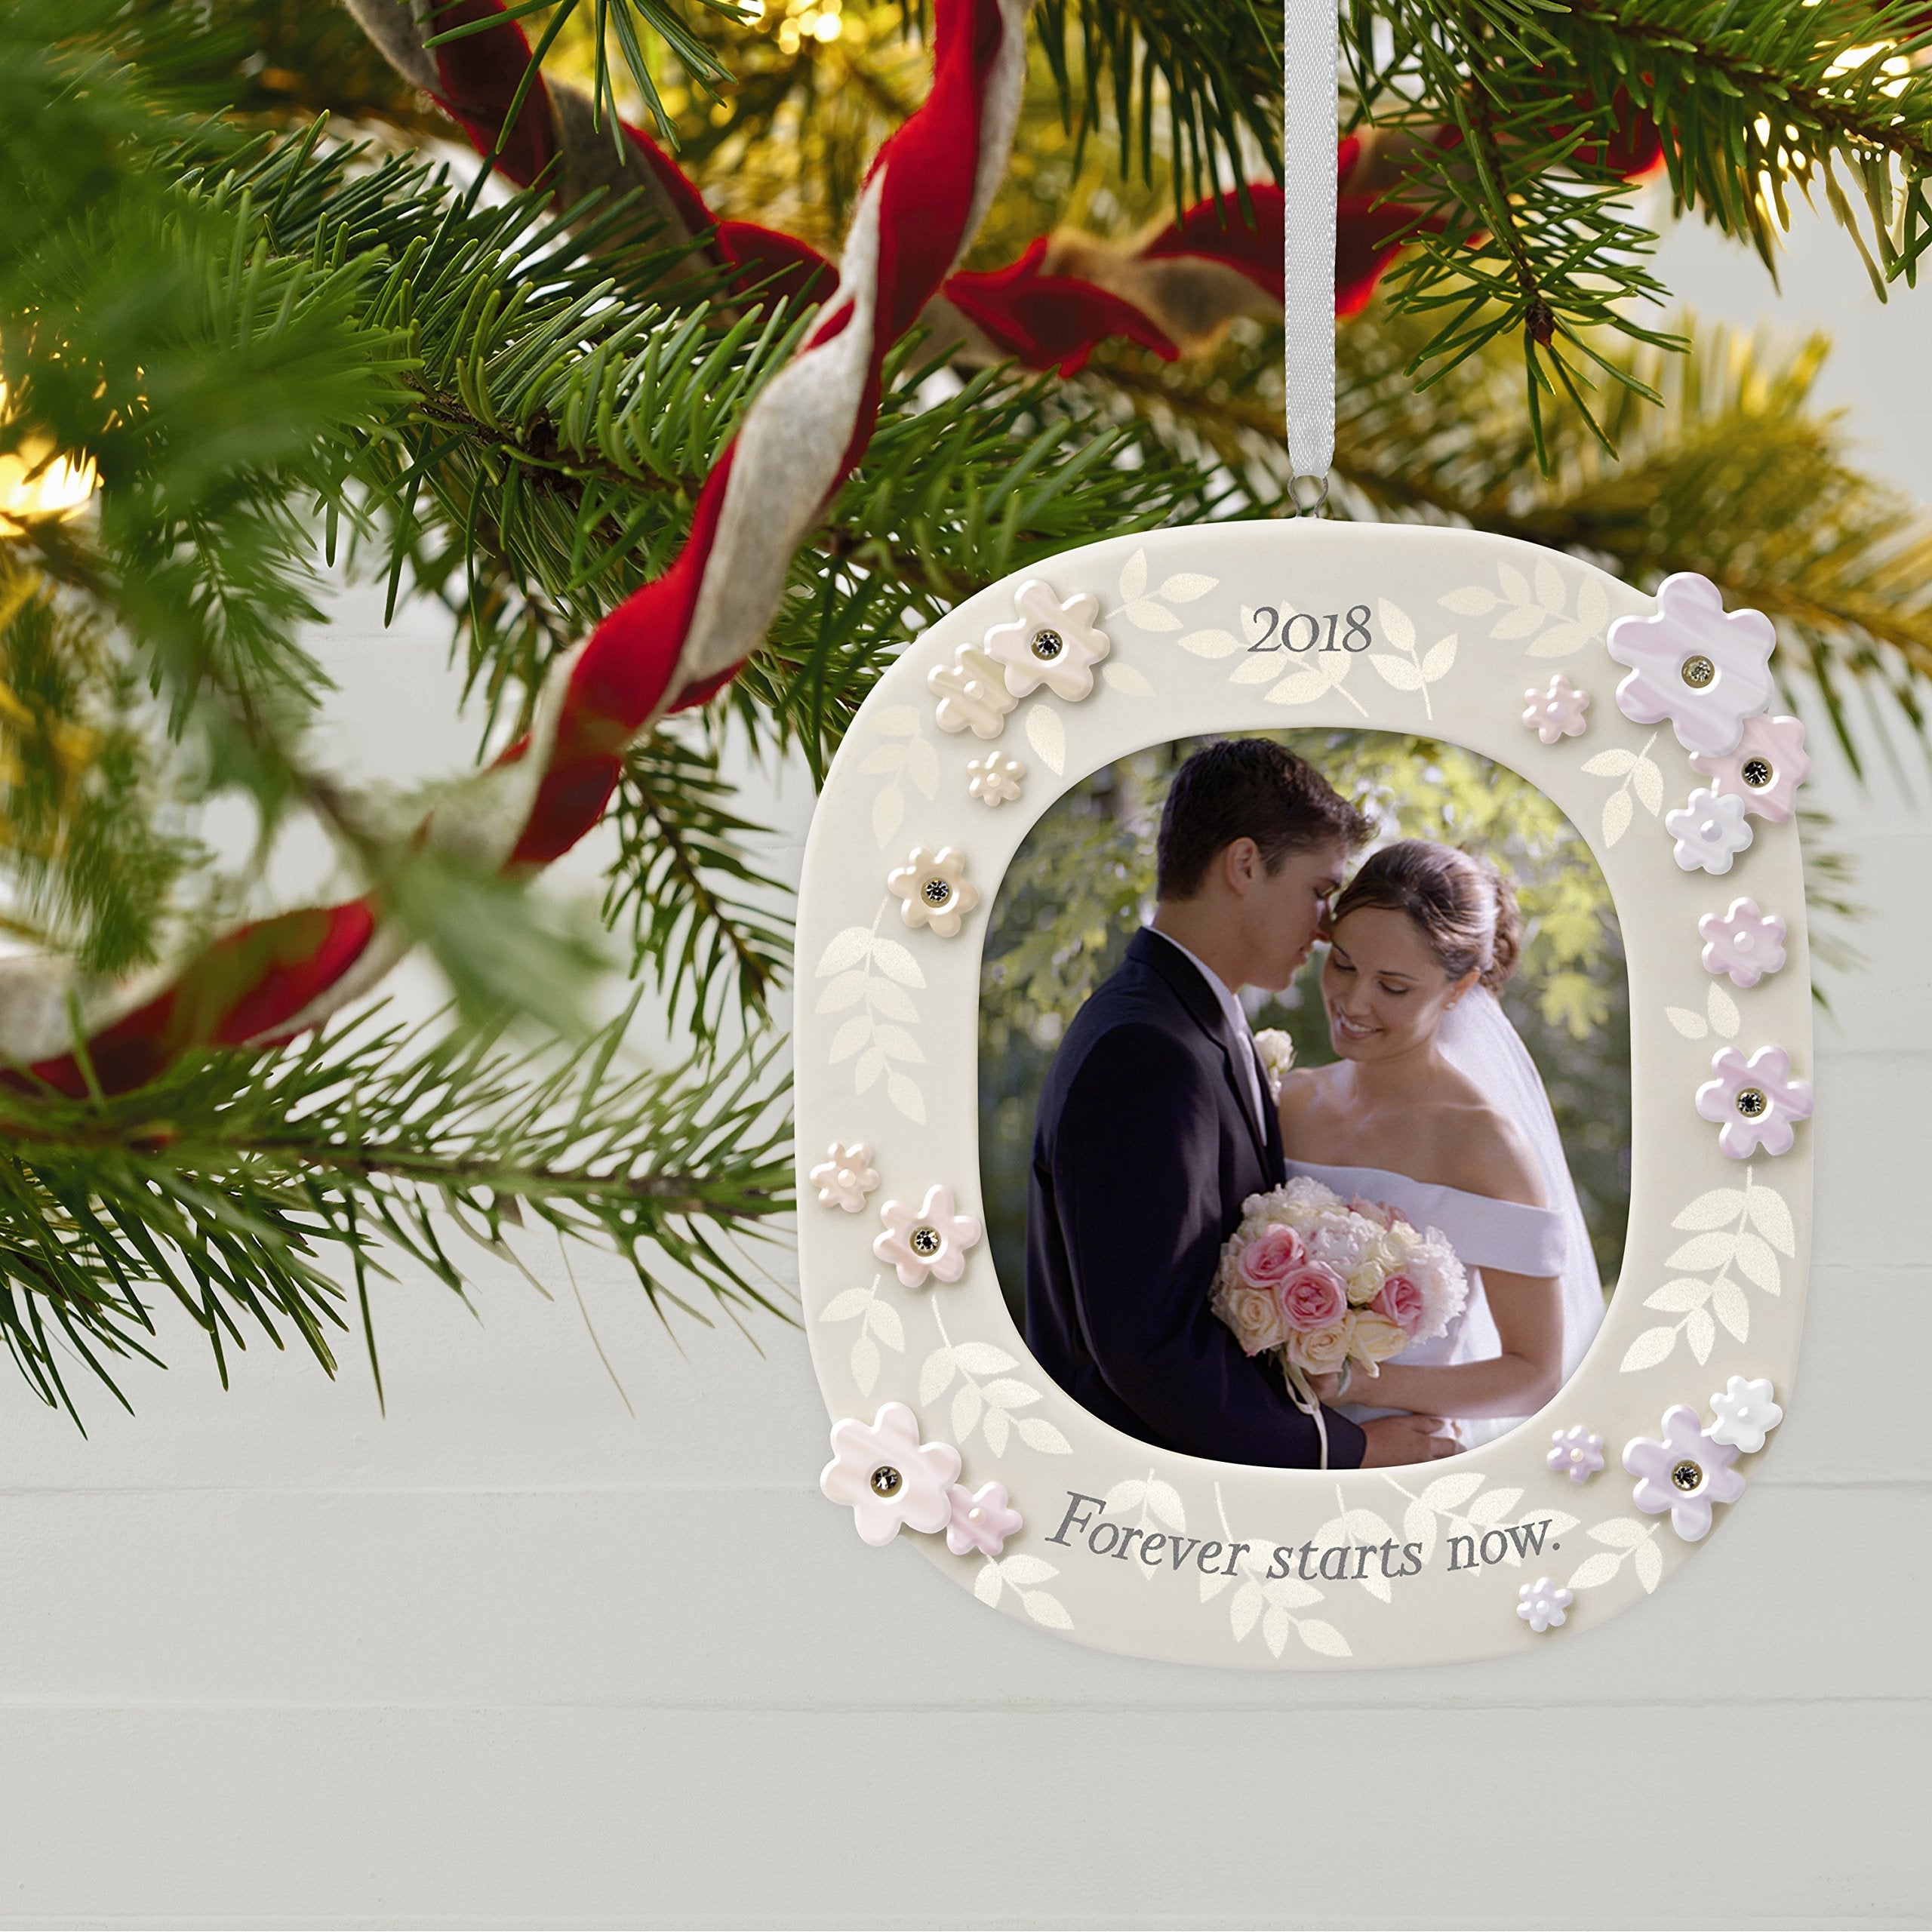 Hallmark Keepsake 2018 Wedding Gift Forever Starts Now Year Dated Porcelain Photo Picture Frame Christmas Ornament